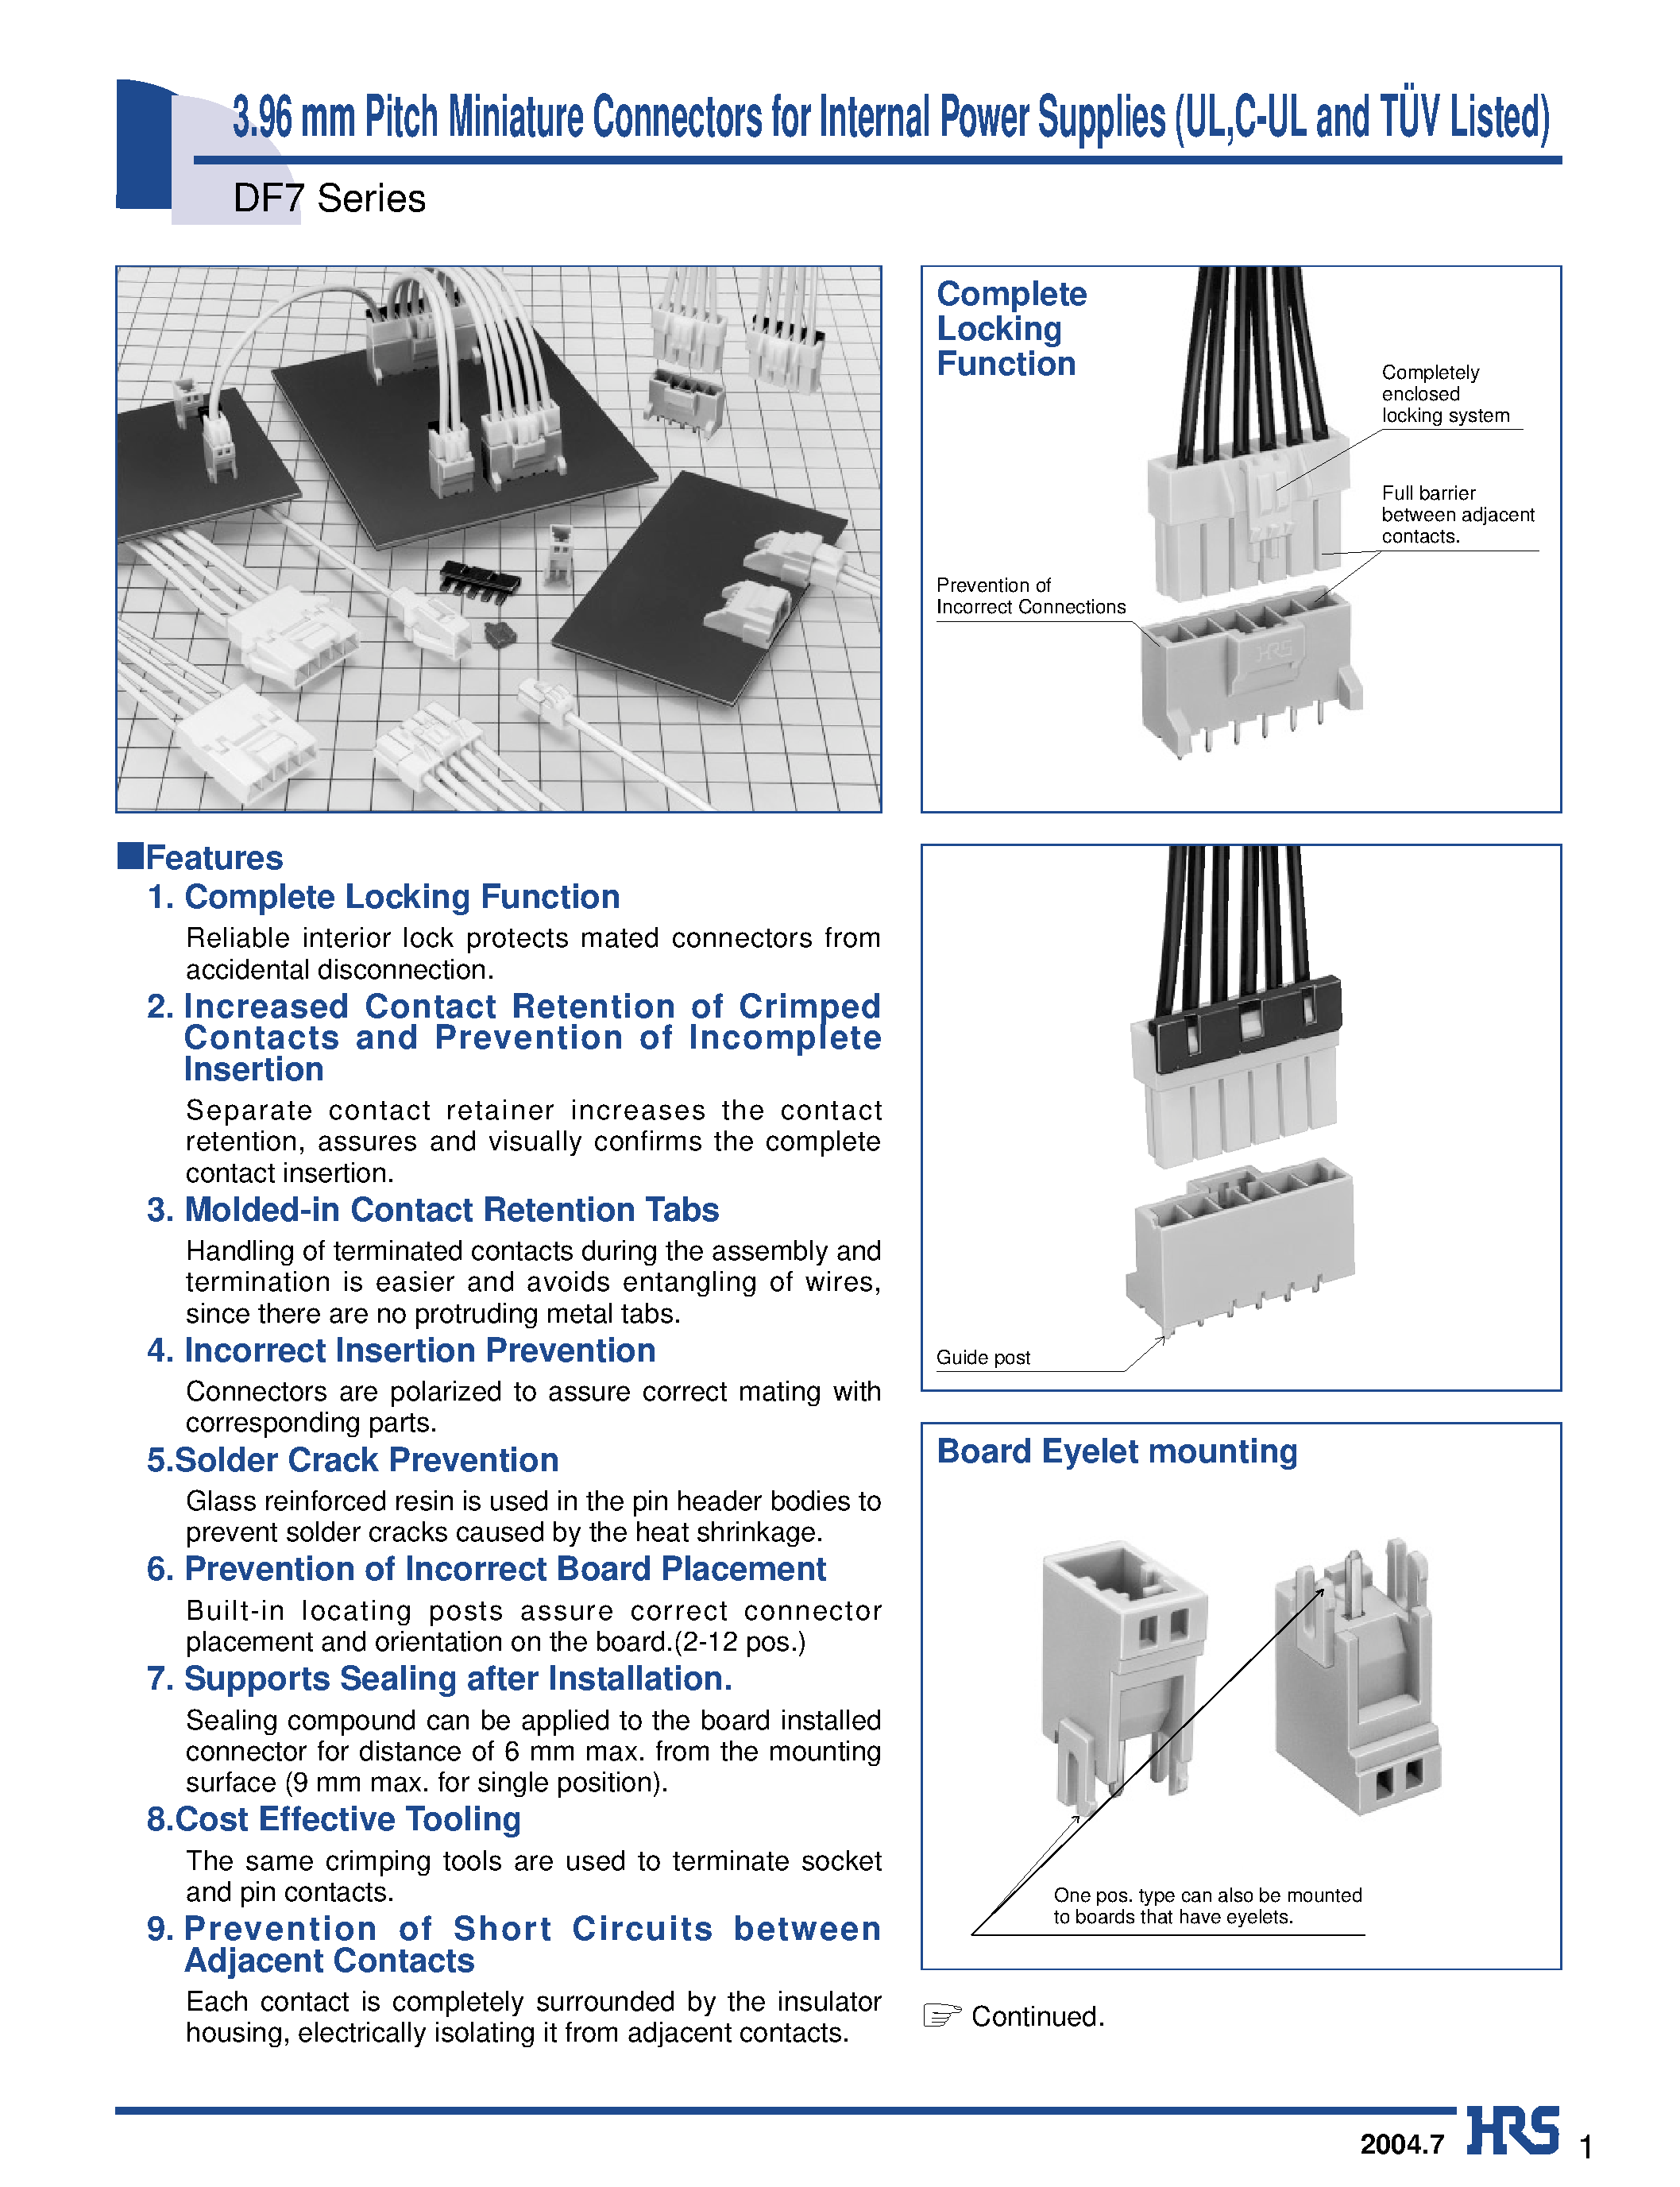 Datasheet DF7-1S-3.96DSA - 3.96 mm Pitch Miniature Connectors for Internal Power Supplies (UL /C-UL and TUV Listed) page 1